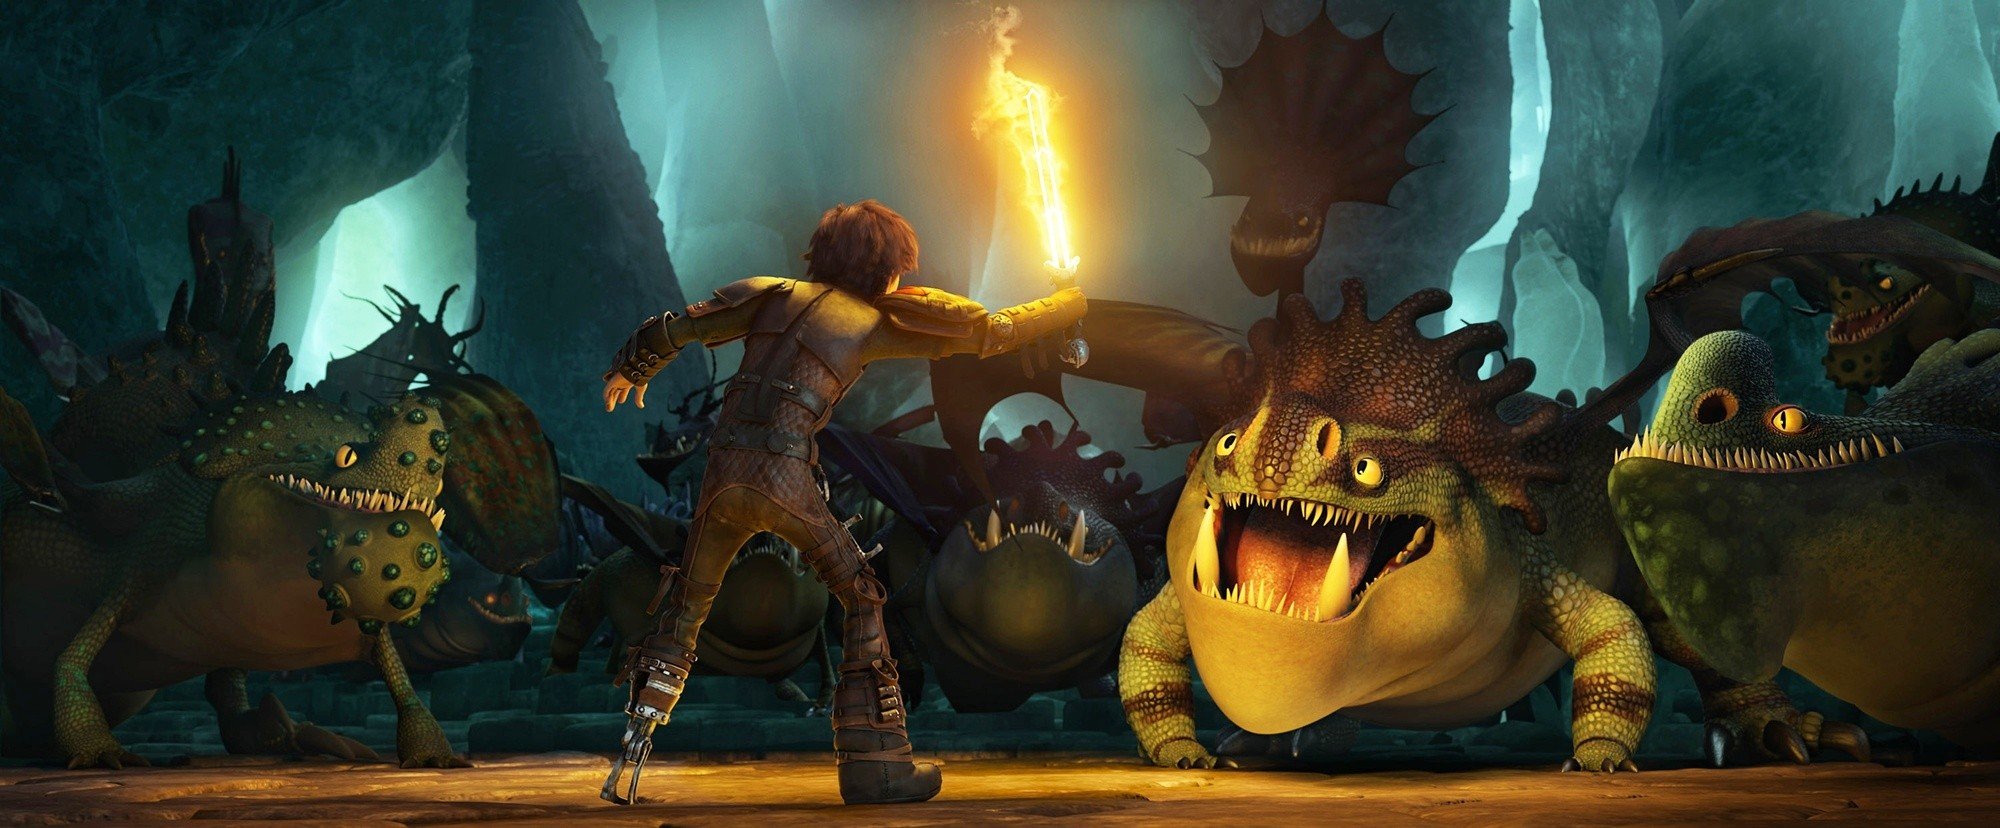 Hiccup from 20th Century Fox's How to Train Your Dragon 2 (2014)